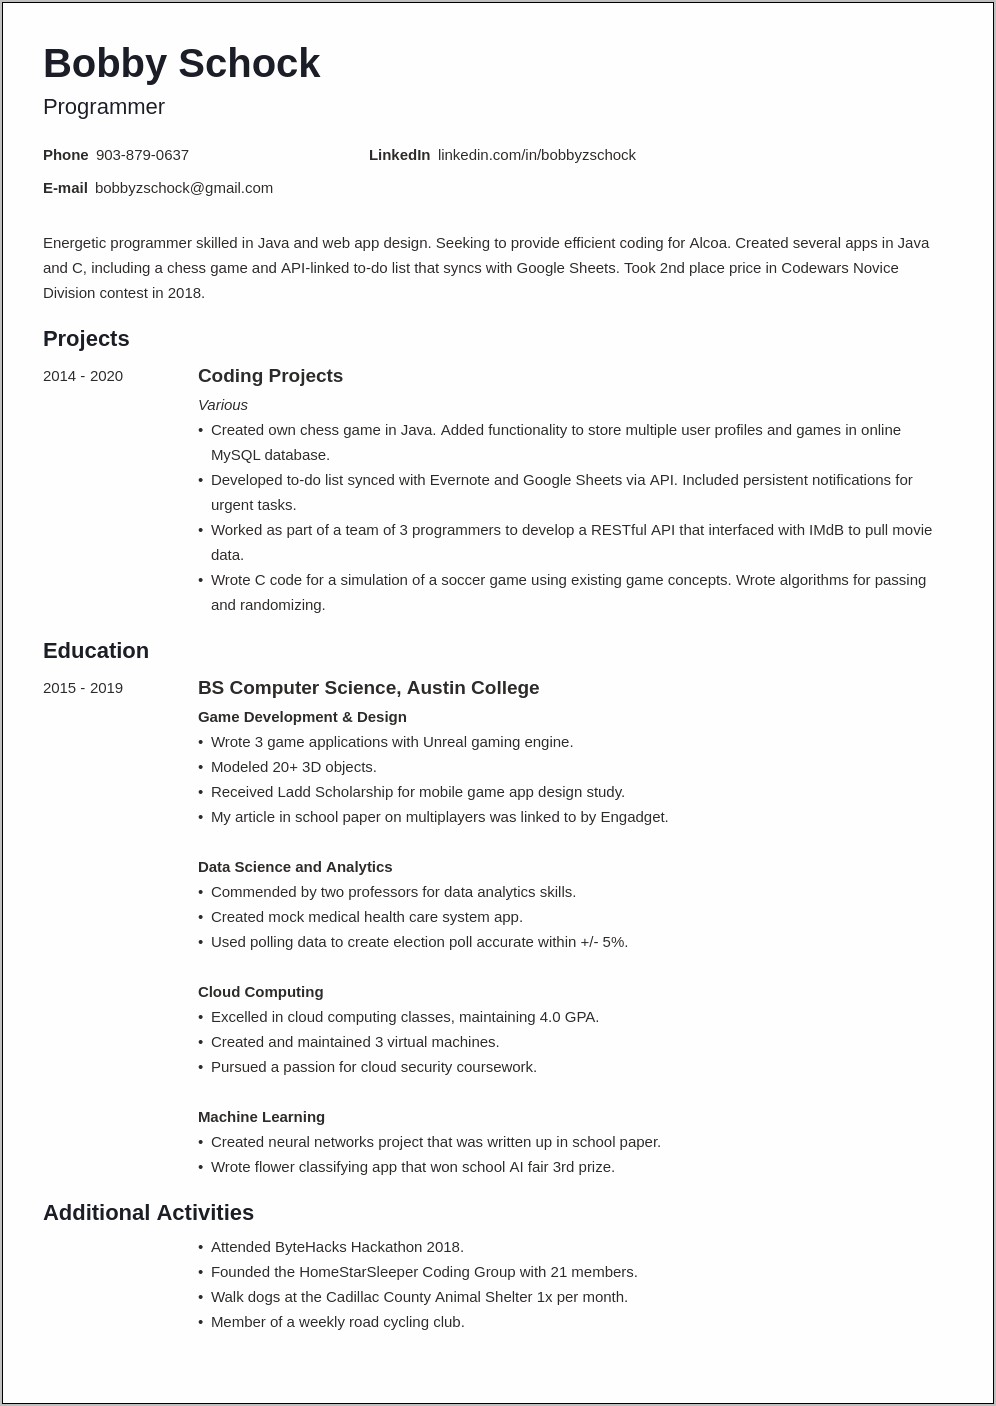 Education Or Professional Experience First On Resume